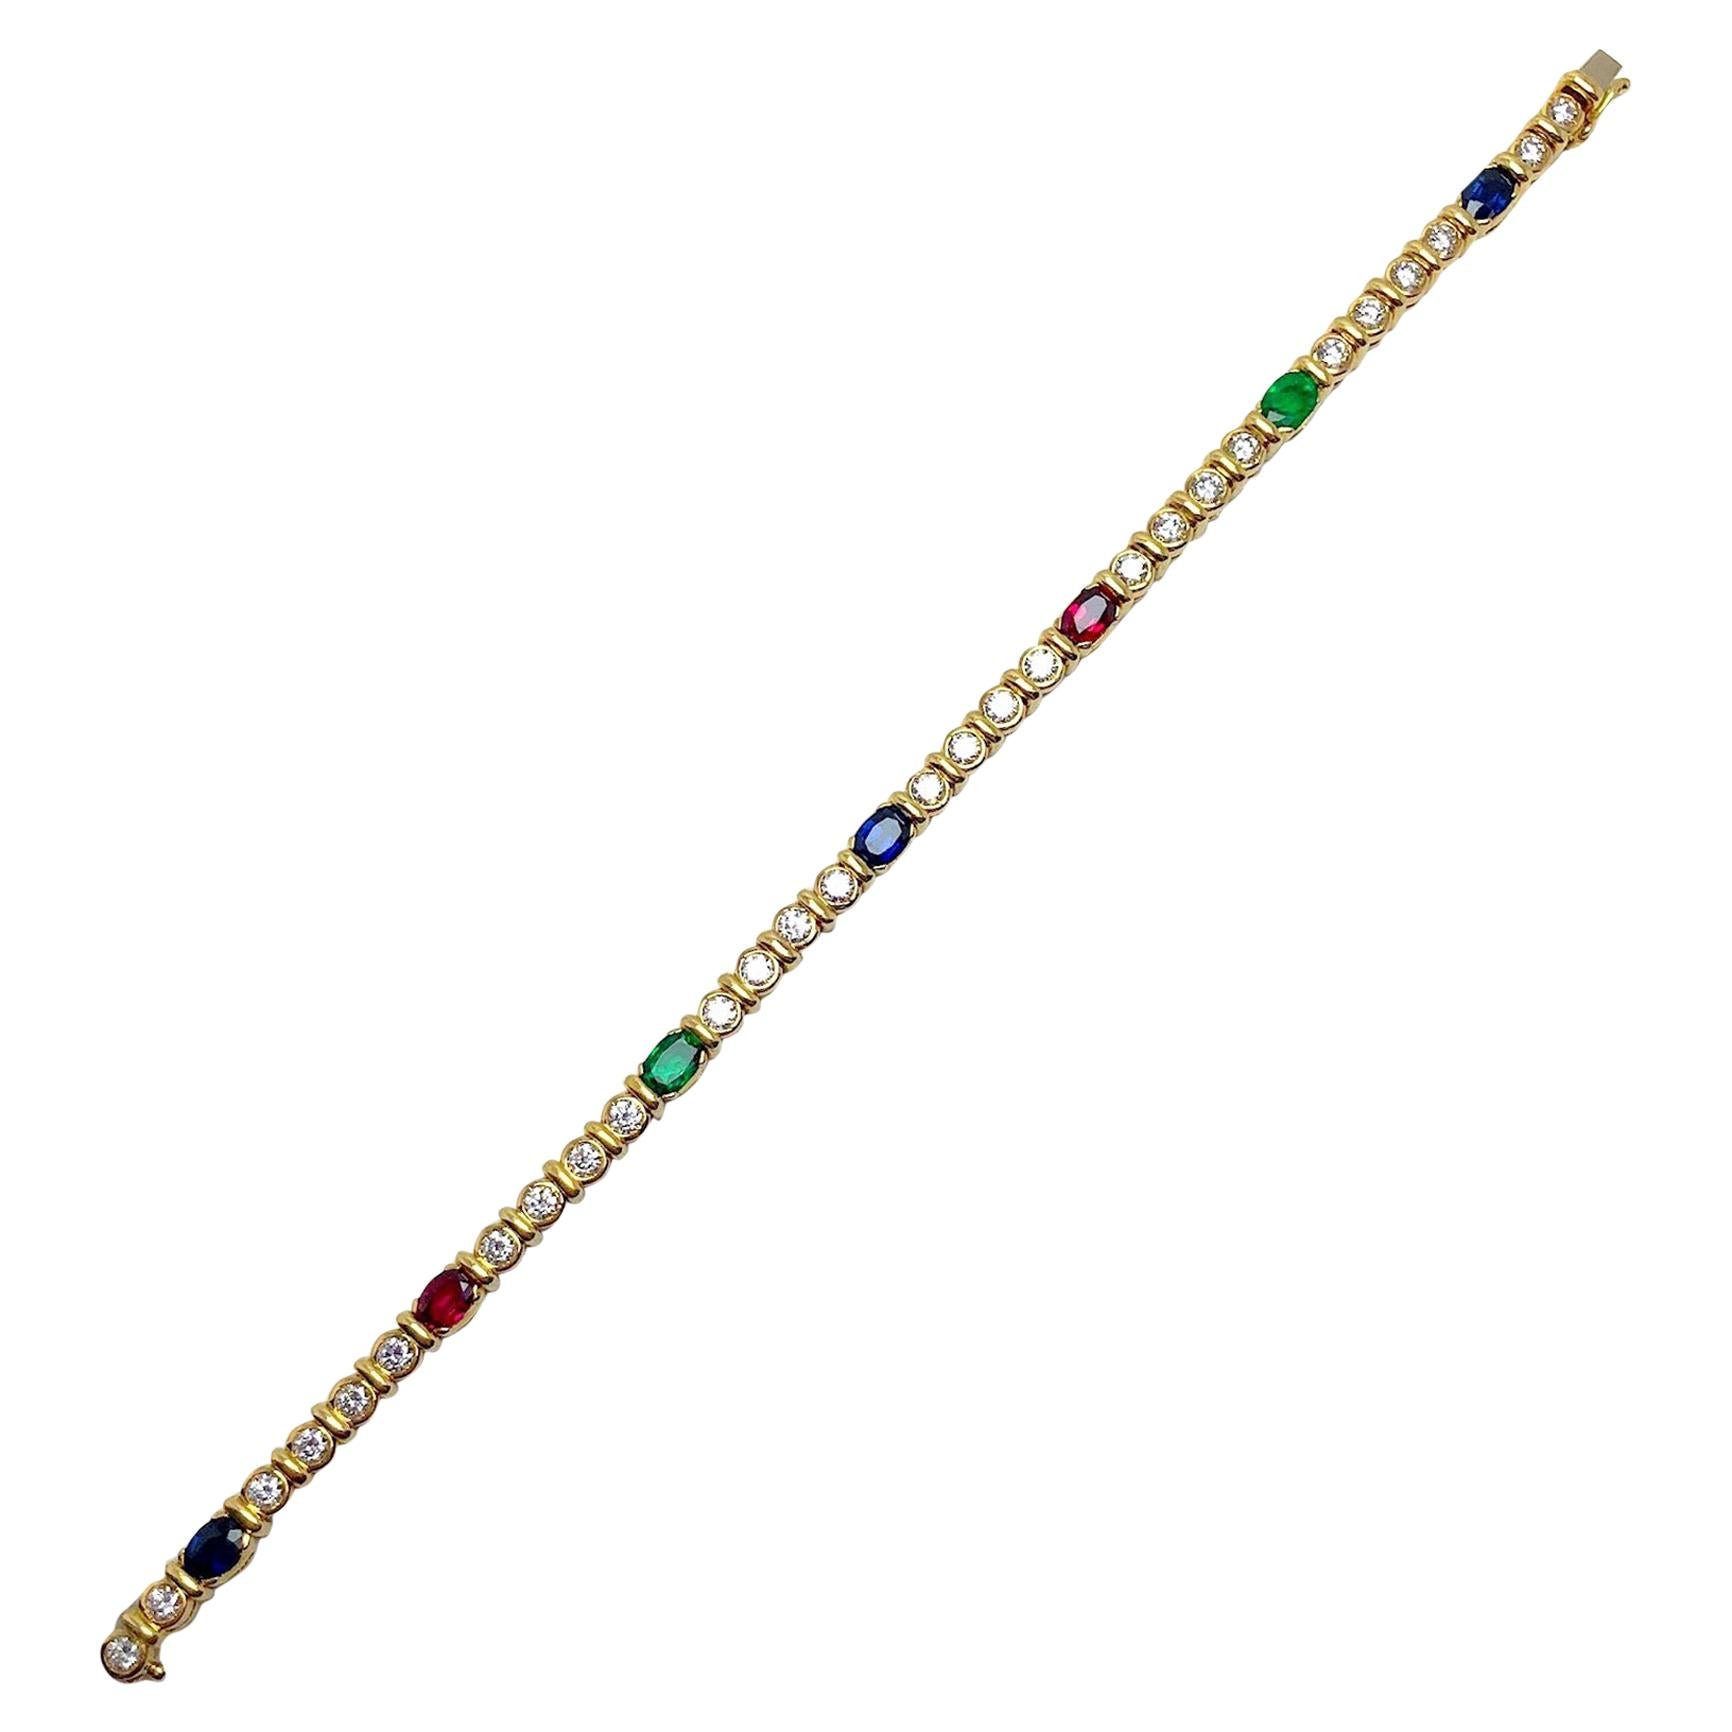 Barzizza 18KT Yellow Gold Bracelet with Diamonds, Rubies, Emeralds and Sapphires